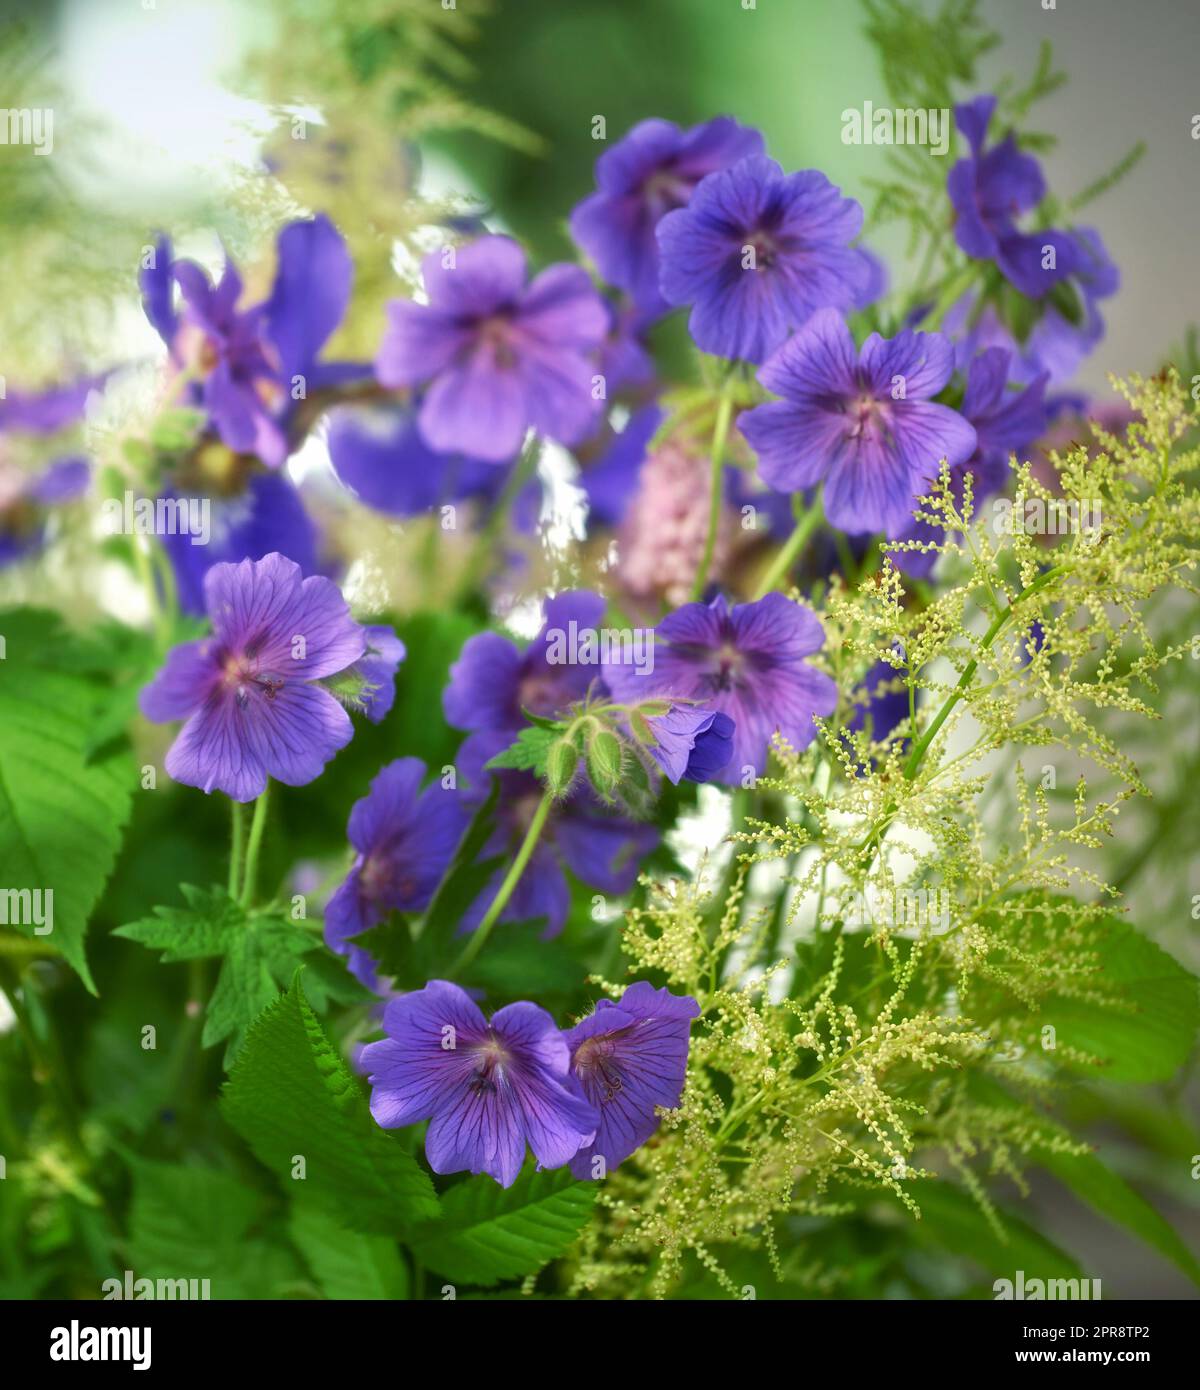 Purple cranesbill flowers growing in a garden. Closeup of bright geranium perennial flowering plants contrasting in a green park. Colorful gardening blossoms for outdoor backyard decoration in spring Stock Photo